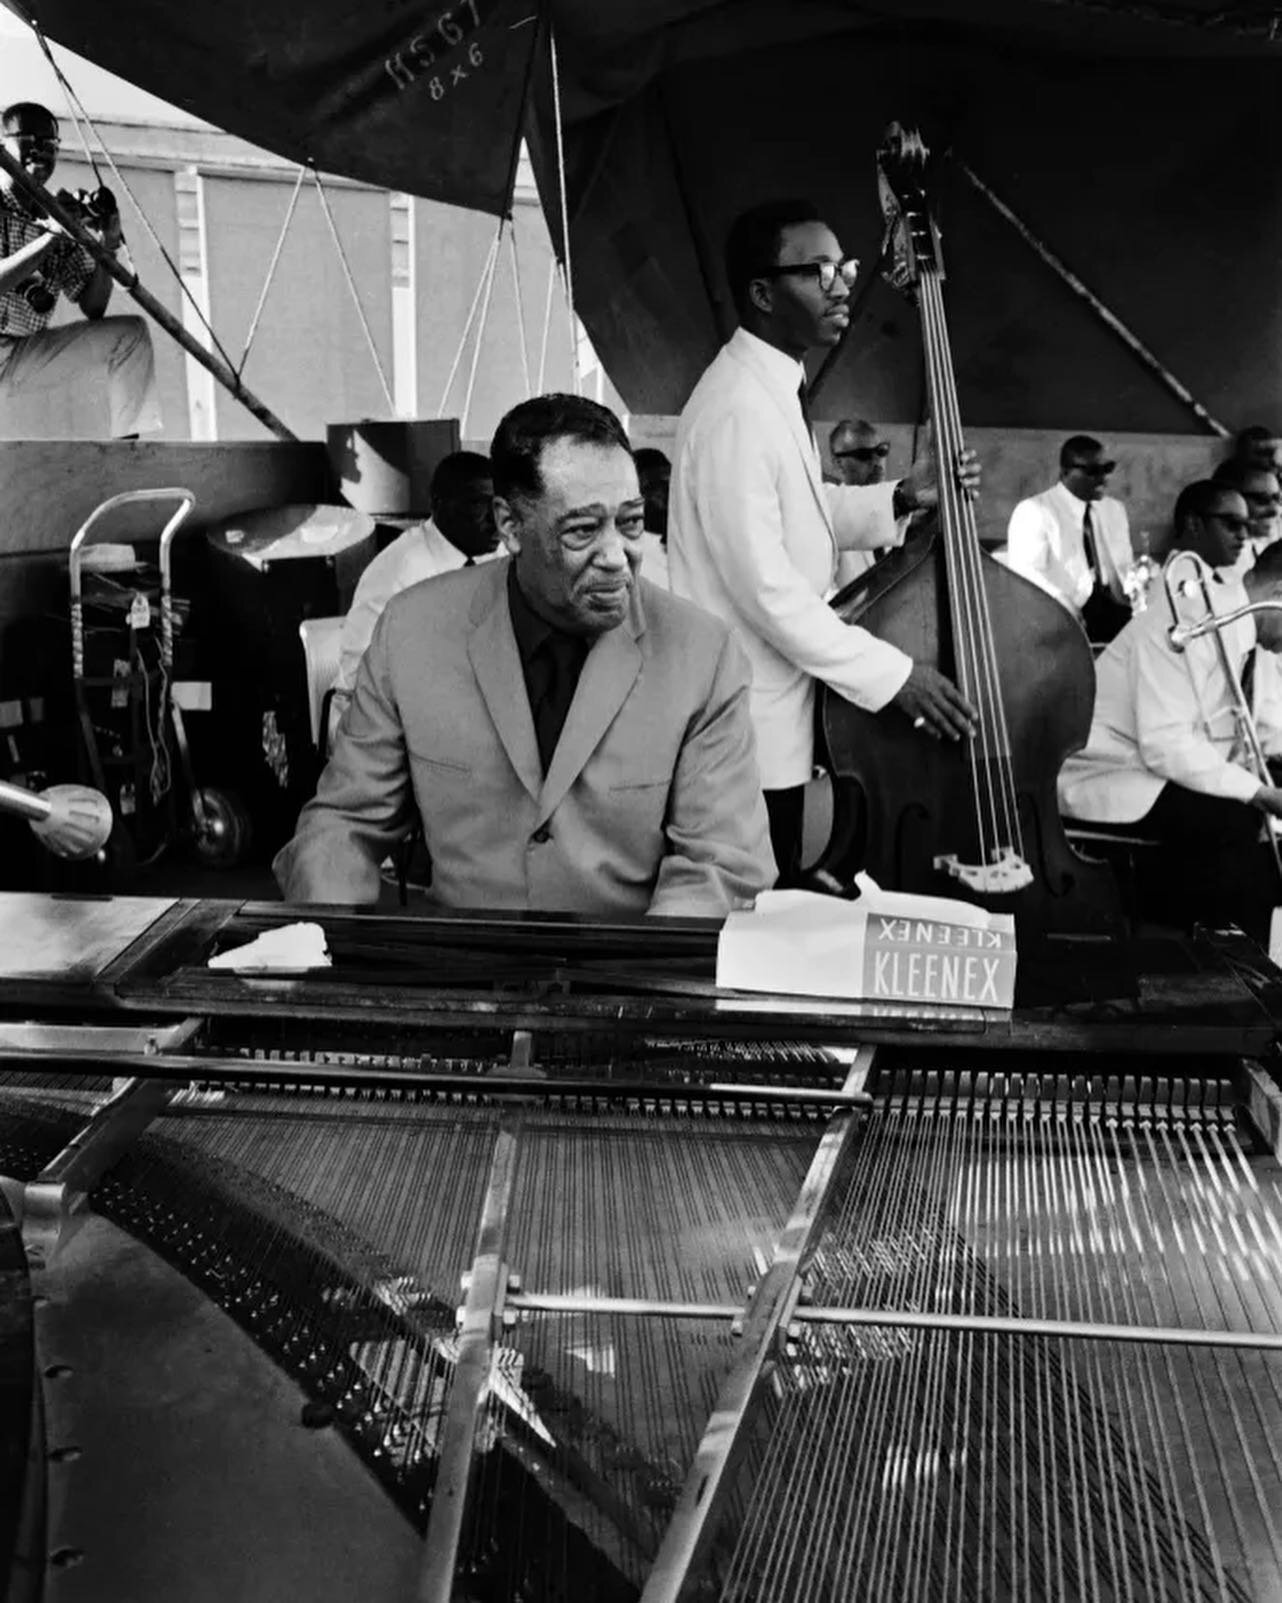 Leading jazz pianist Duke Ellington was born on this day, April 29th in 1899. In April 1966, he performed during the First World Festival of Negro Arts (FESMAN). In honor of the festival, Ellington composed and the piece &ldquo;La Plus Belle Africain